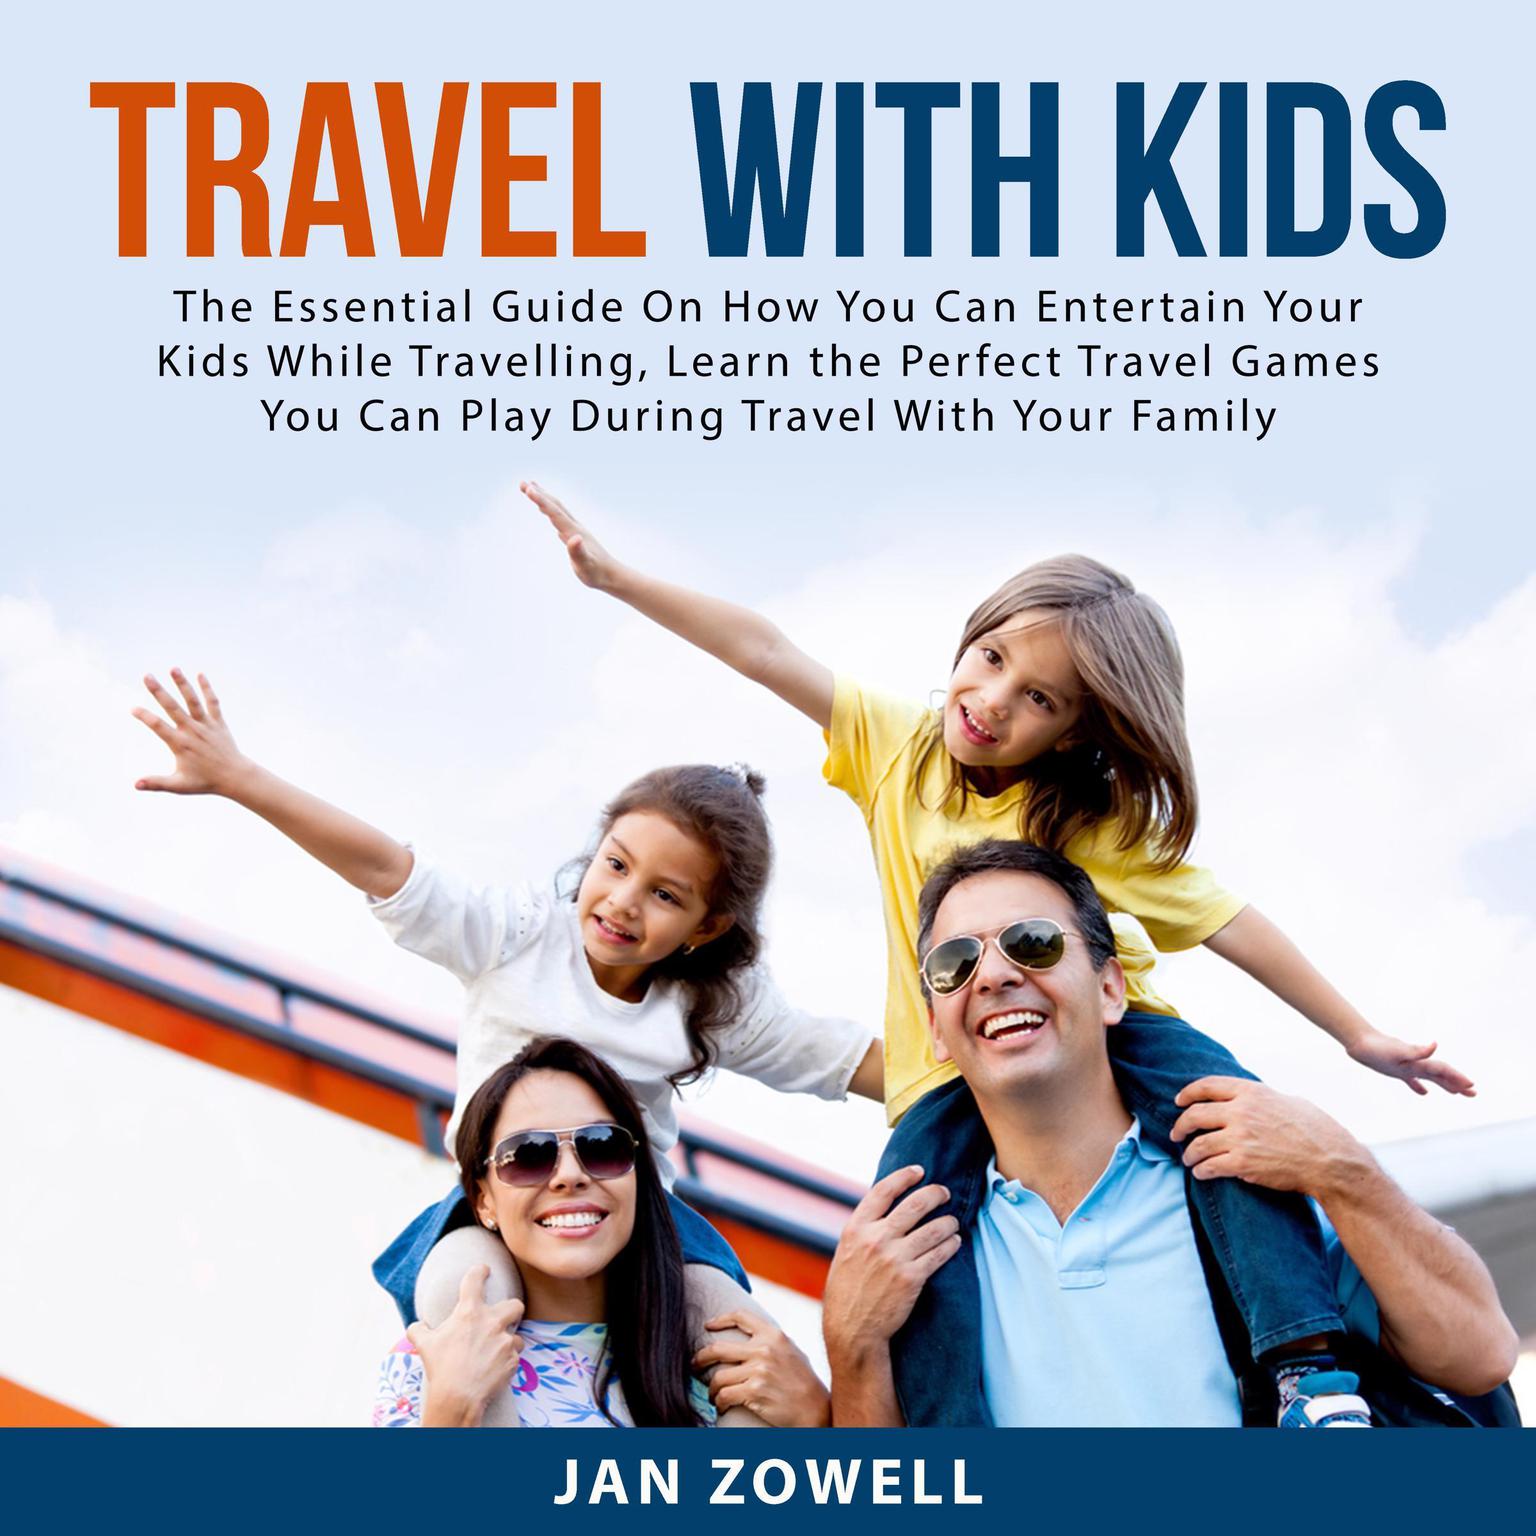 Travel With Kids: The Essential Guide On How You Can Entertain Your Kids While Travelling, Learn the Perfect Travel Games You Can Play During Travel With Your Family Audiobook, by Jan Zowell